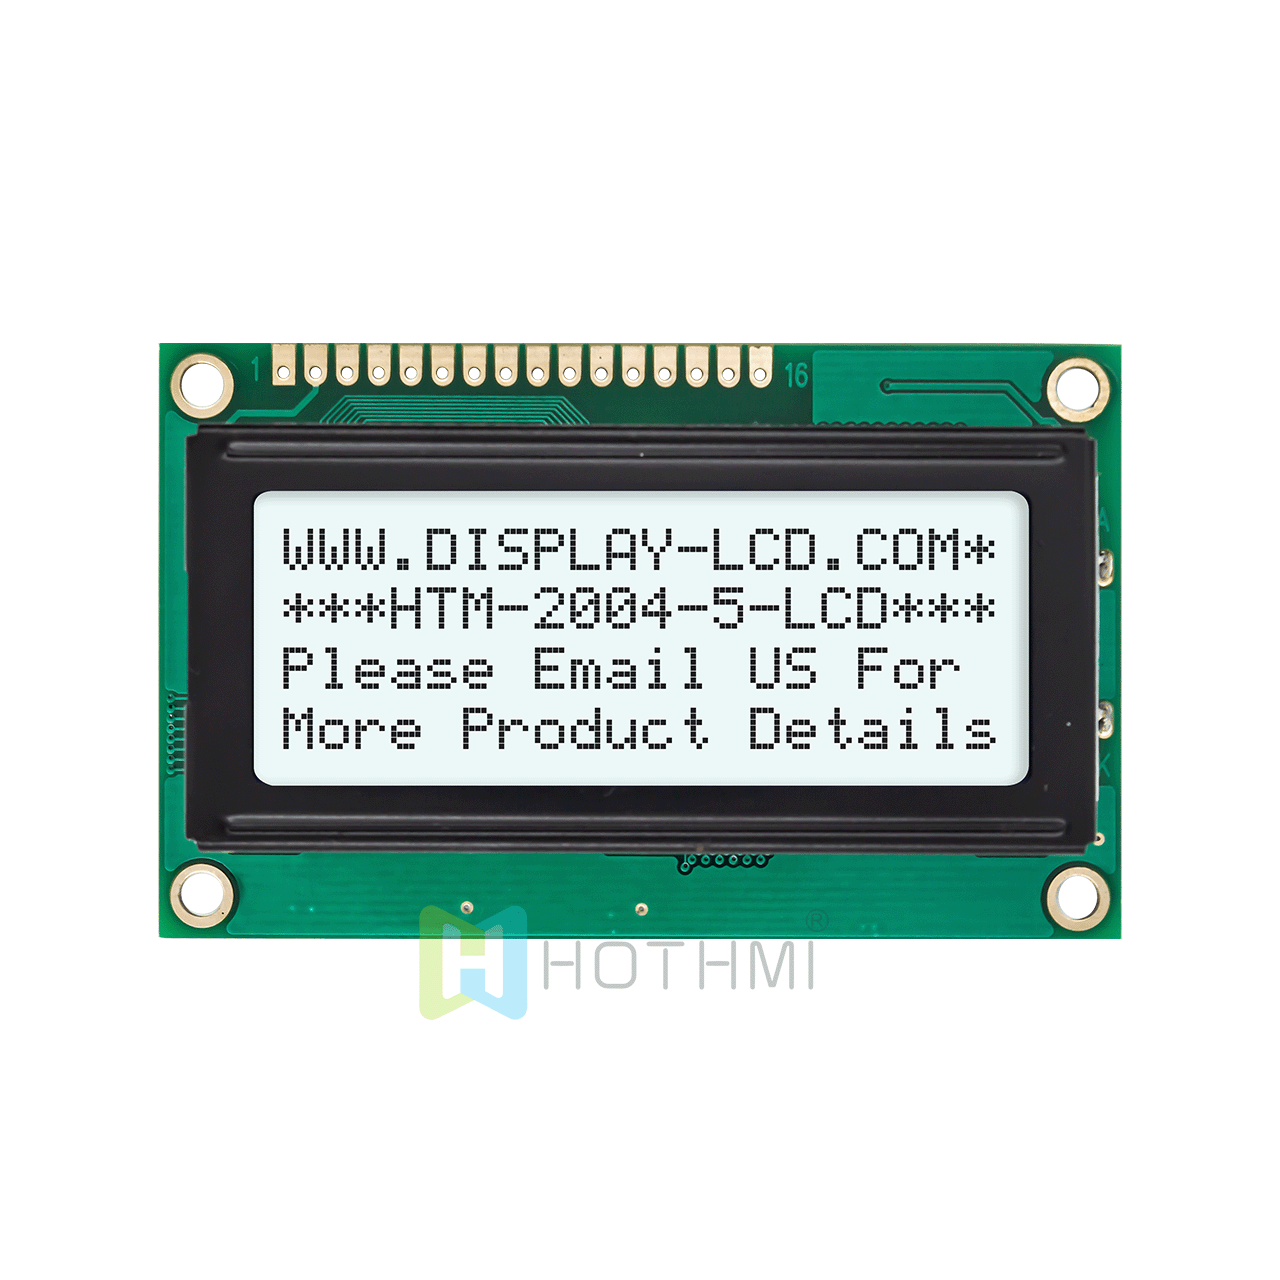 3.3v/5.0v/4X20 monochrome character LCD module/FSTN positive display/white backlight/white background with gray characters/Arduino/transflective LCD display